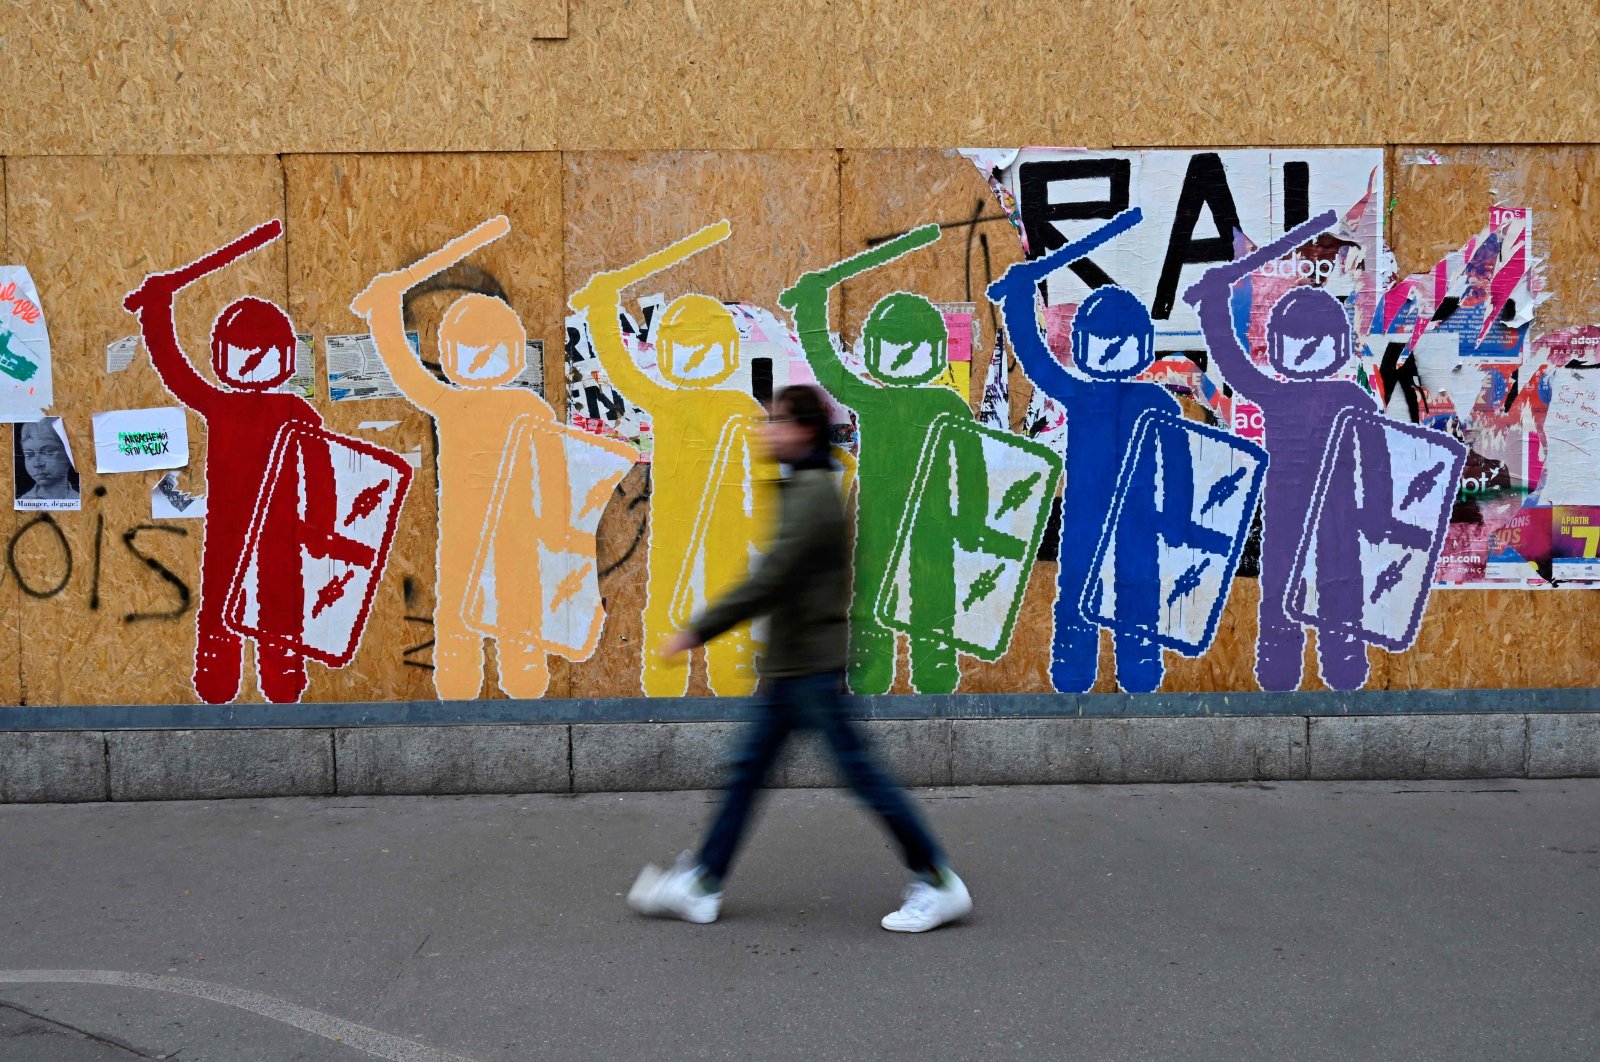 A pedestrian passes by posters of anti-riot policemen ahead of a demonstration on the 11th day of action after the government pushed a pensions reform through parliament without a vote, using Article 49.3 of the constitution, in Rennes, western France, April 6, 2023. (AFP Photo)